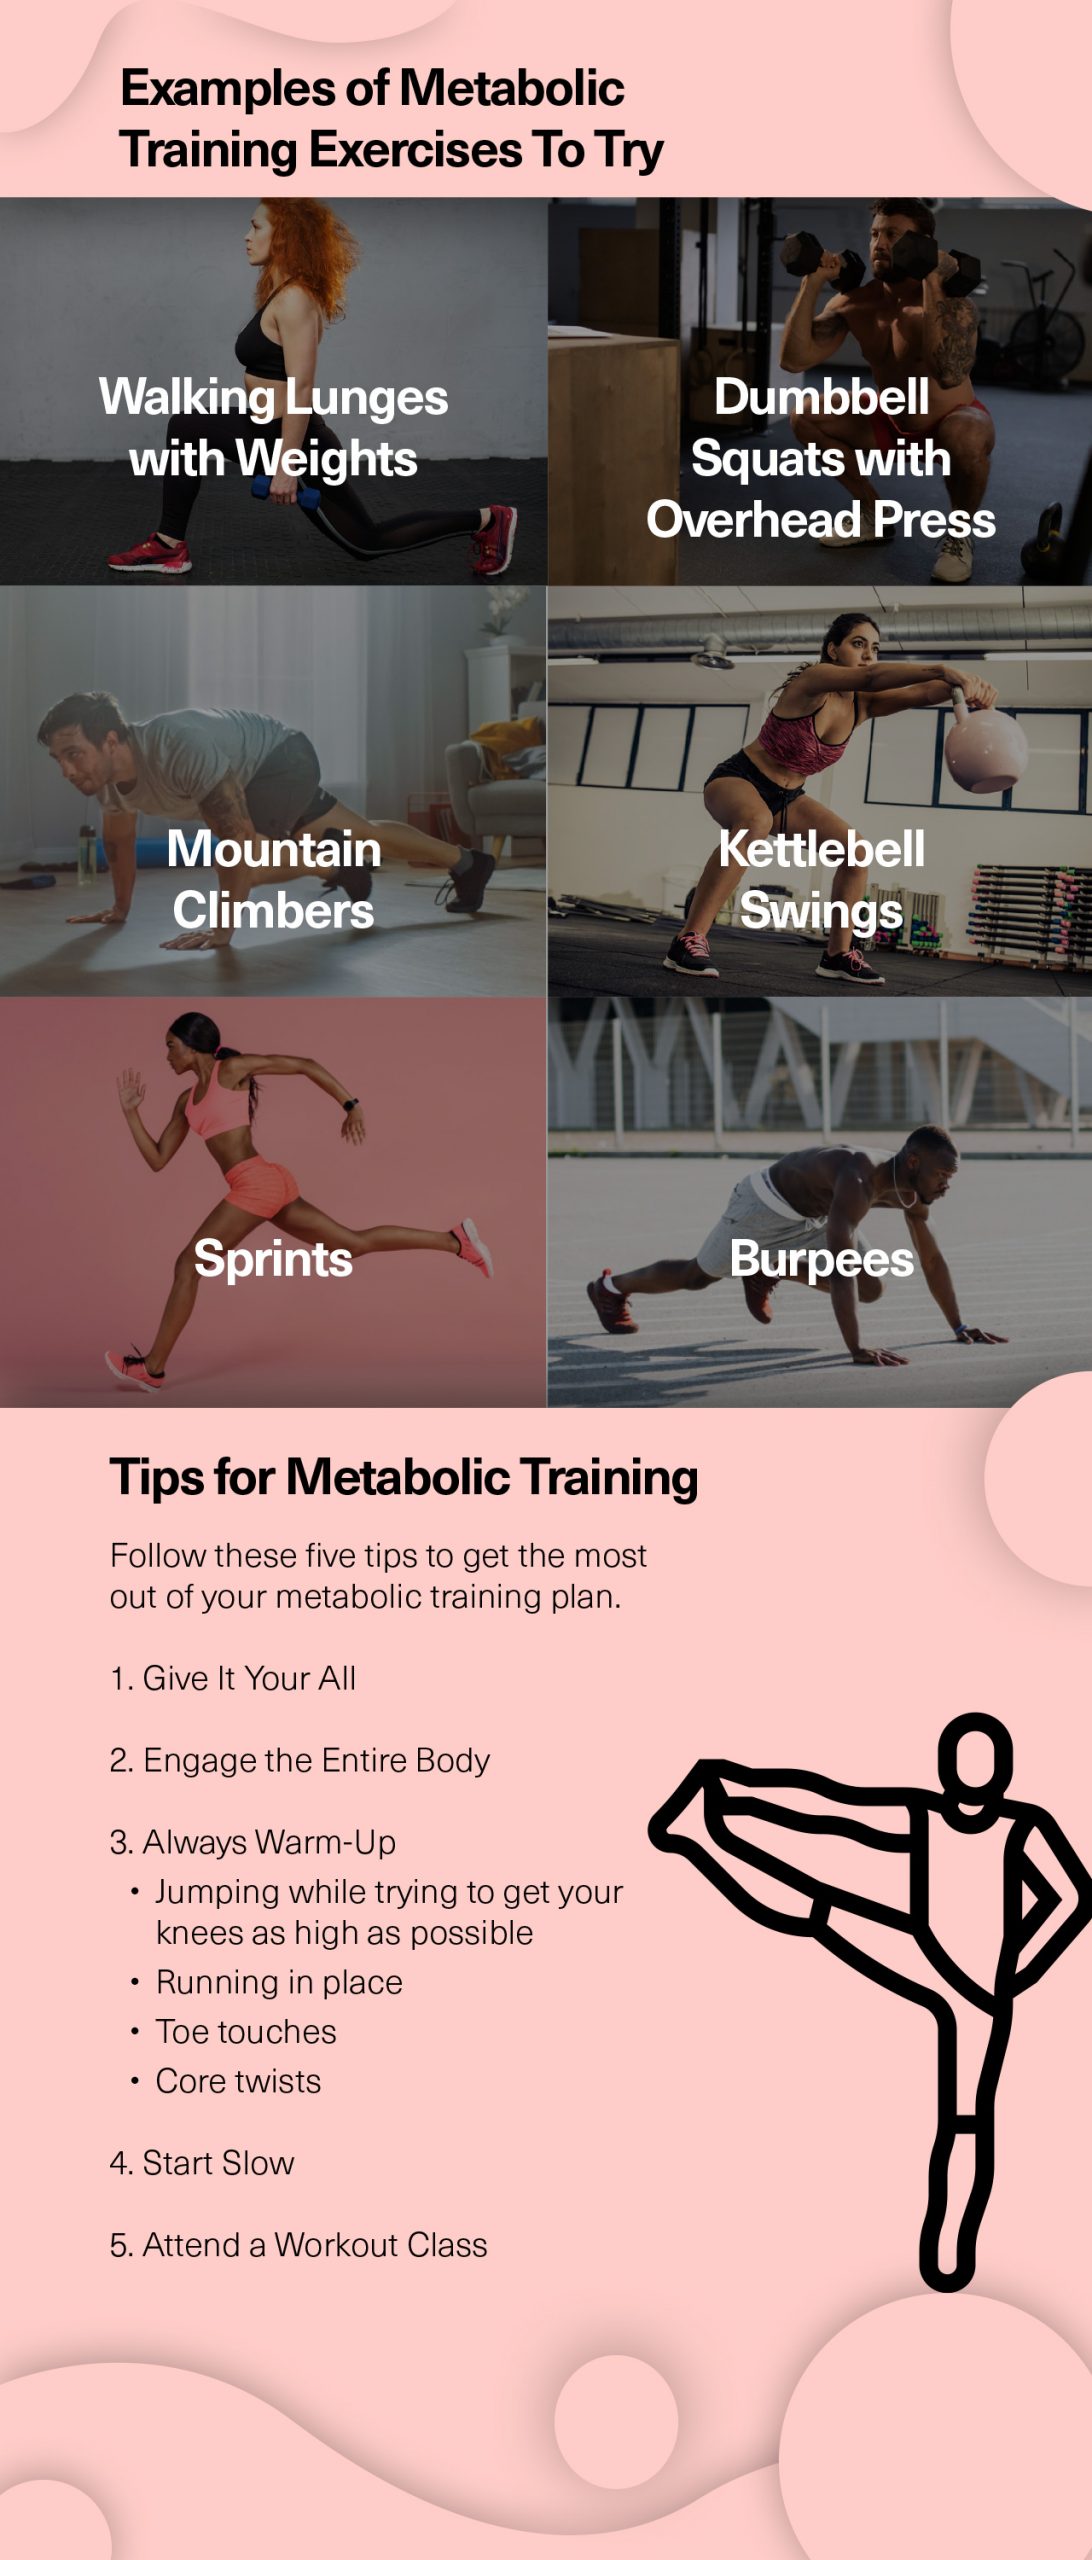 Examples of Metabolic Training Exercises To Try